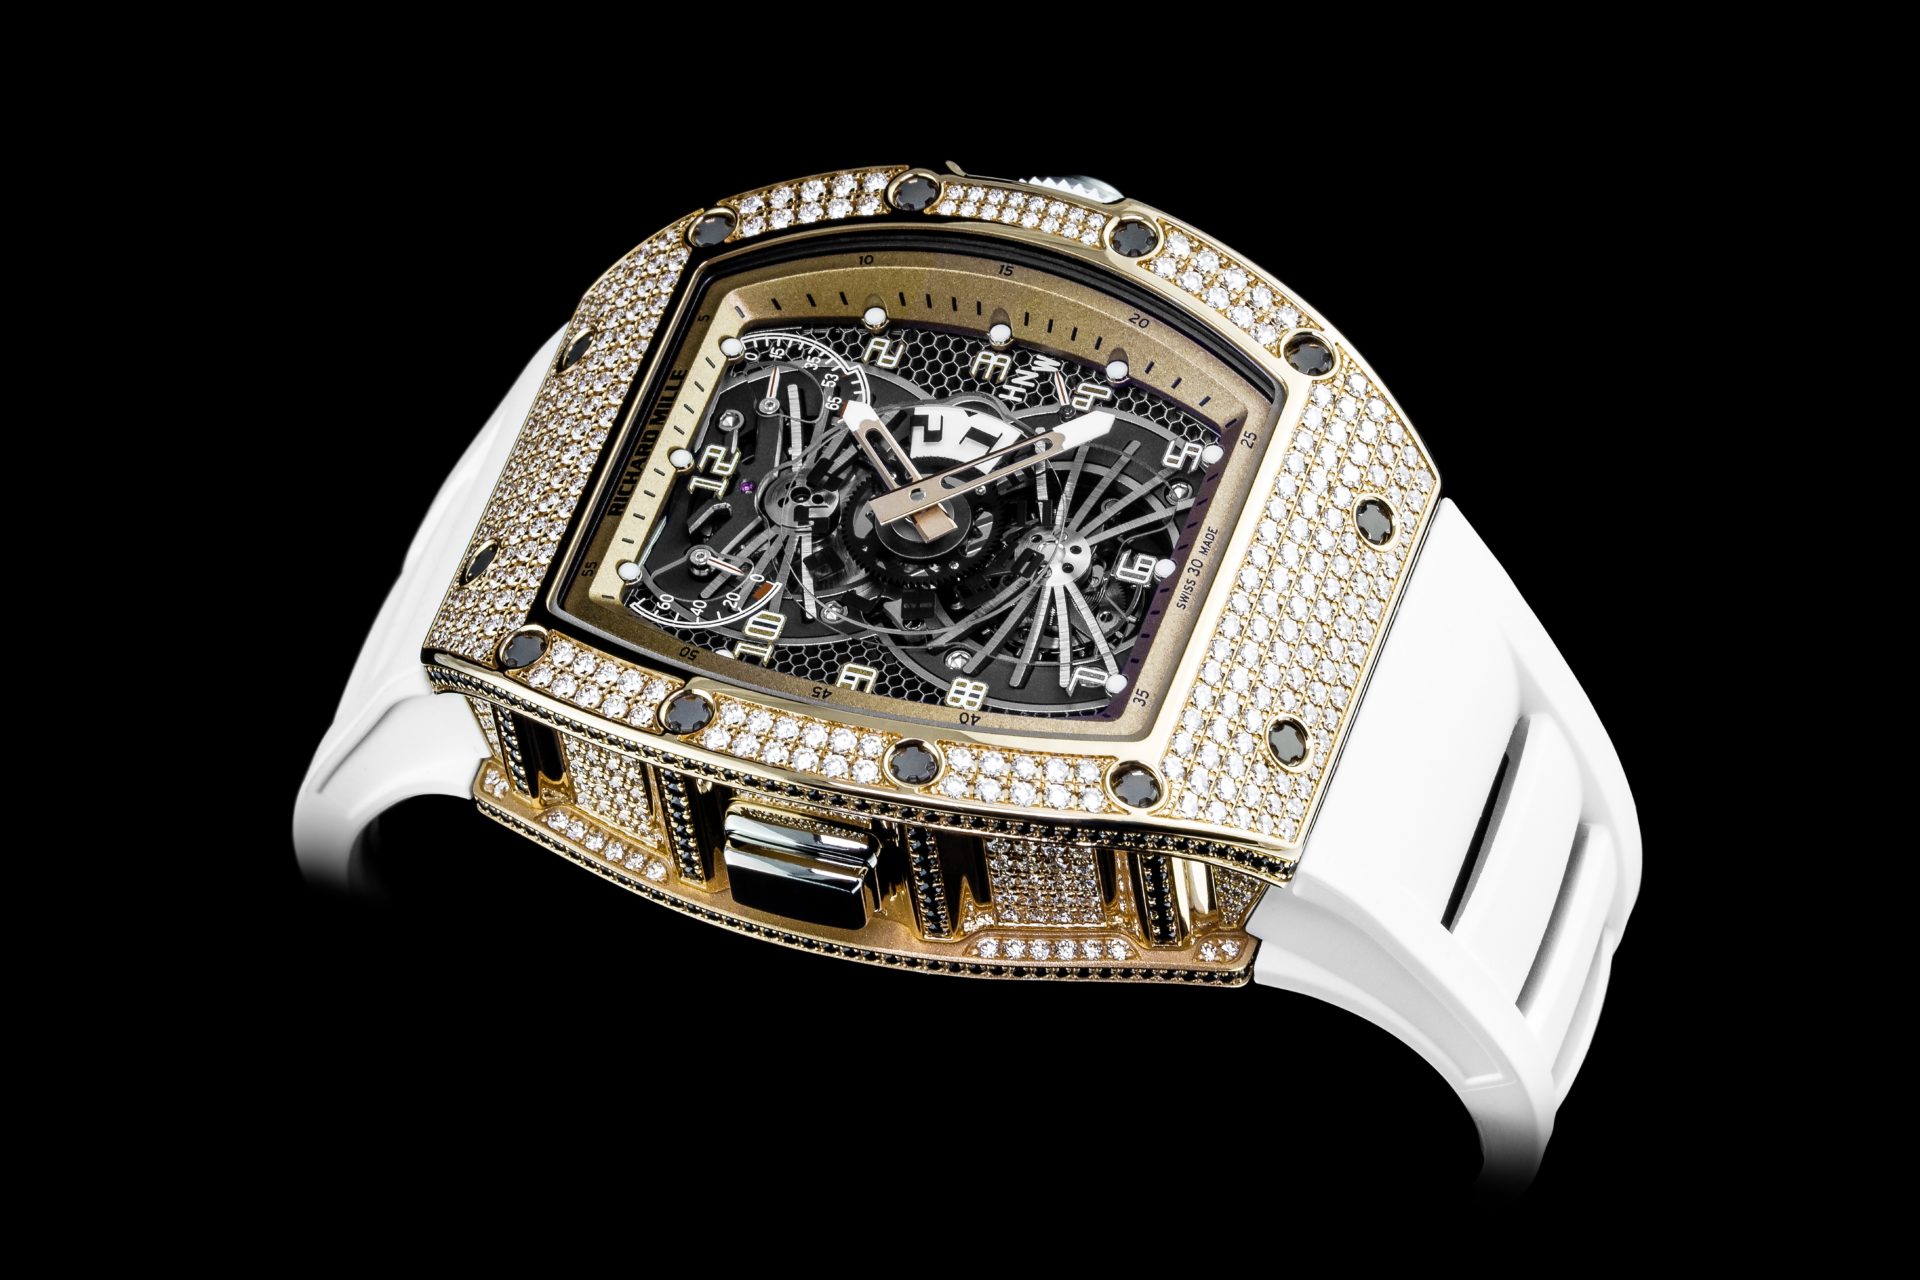 Richard Mille Flyback Chronograph RM11-03 RG 18k rose gold 45mm watch